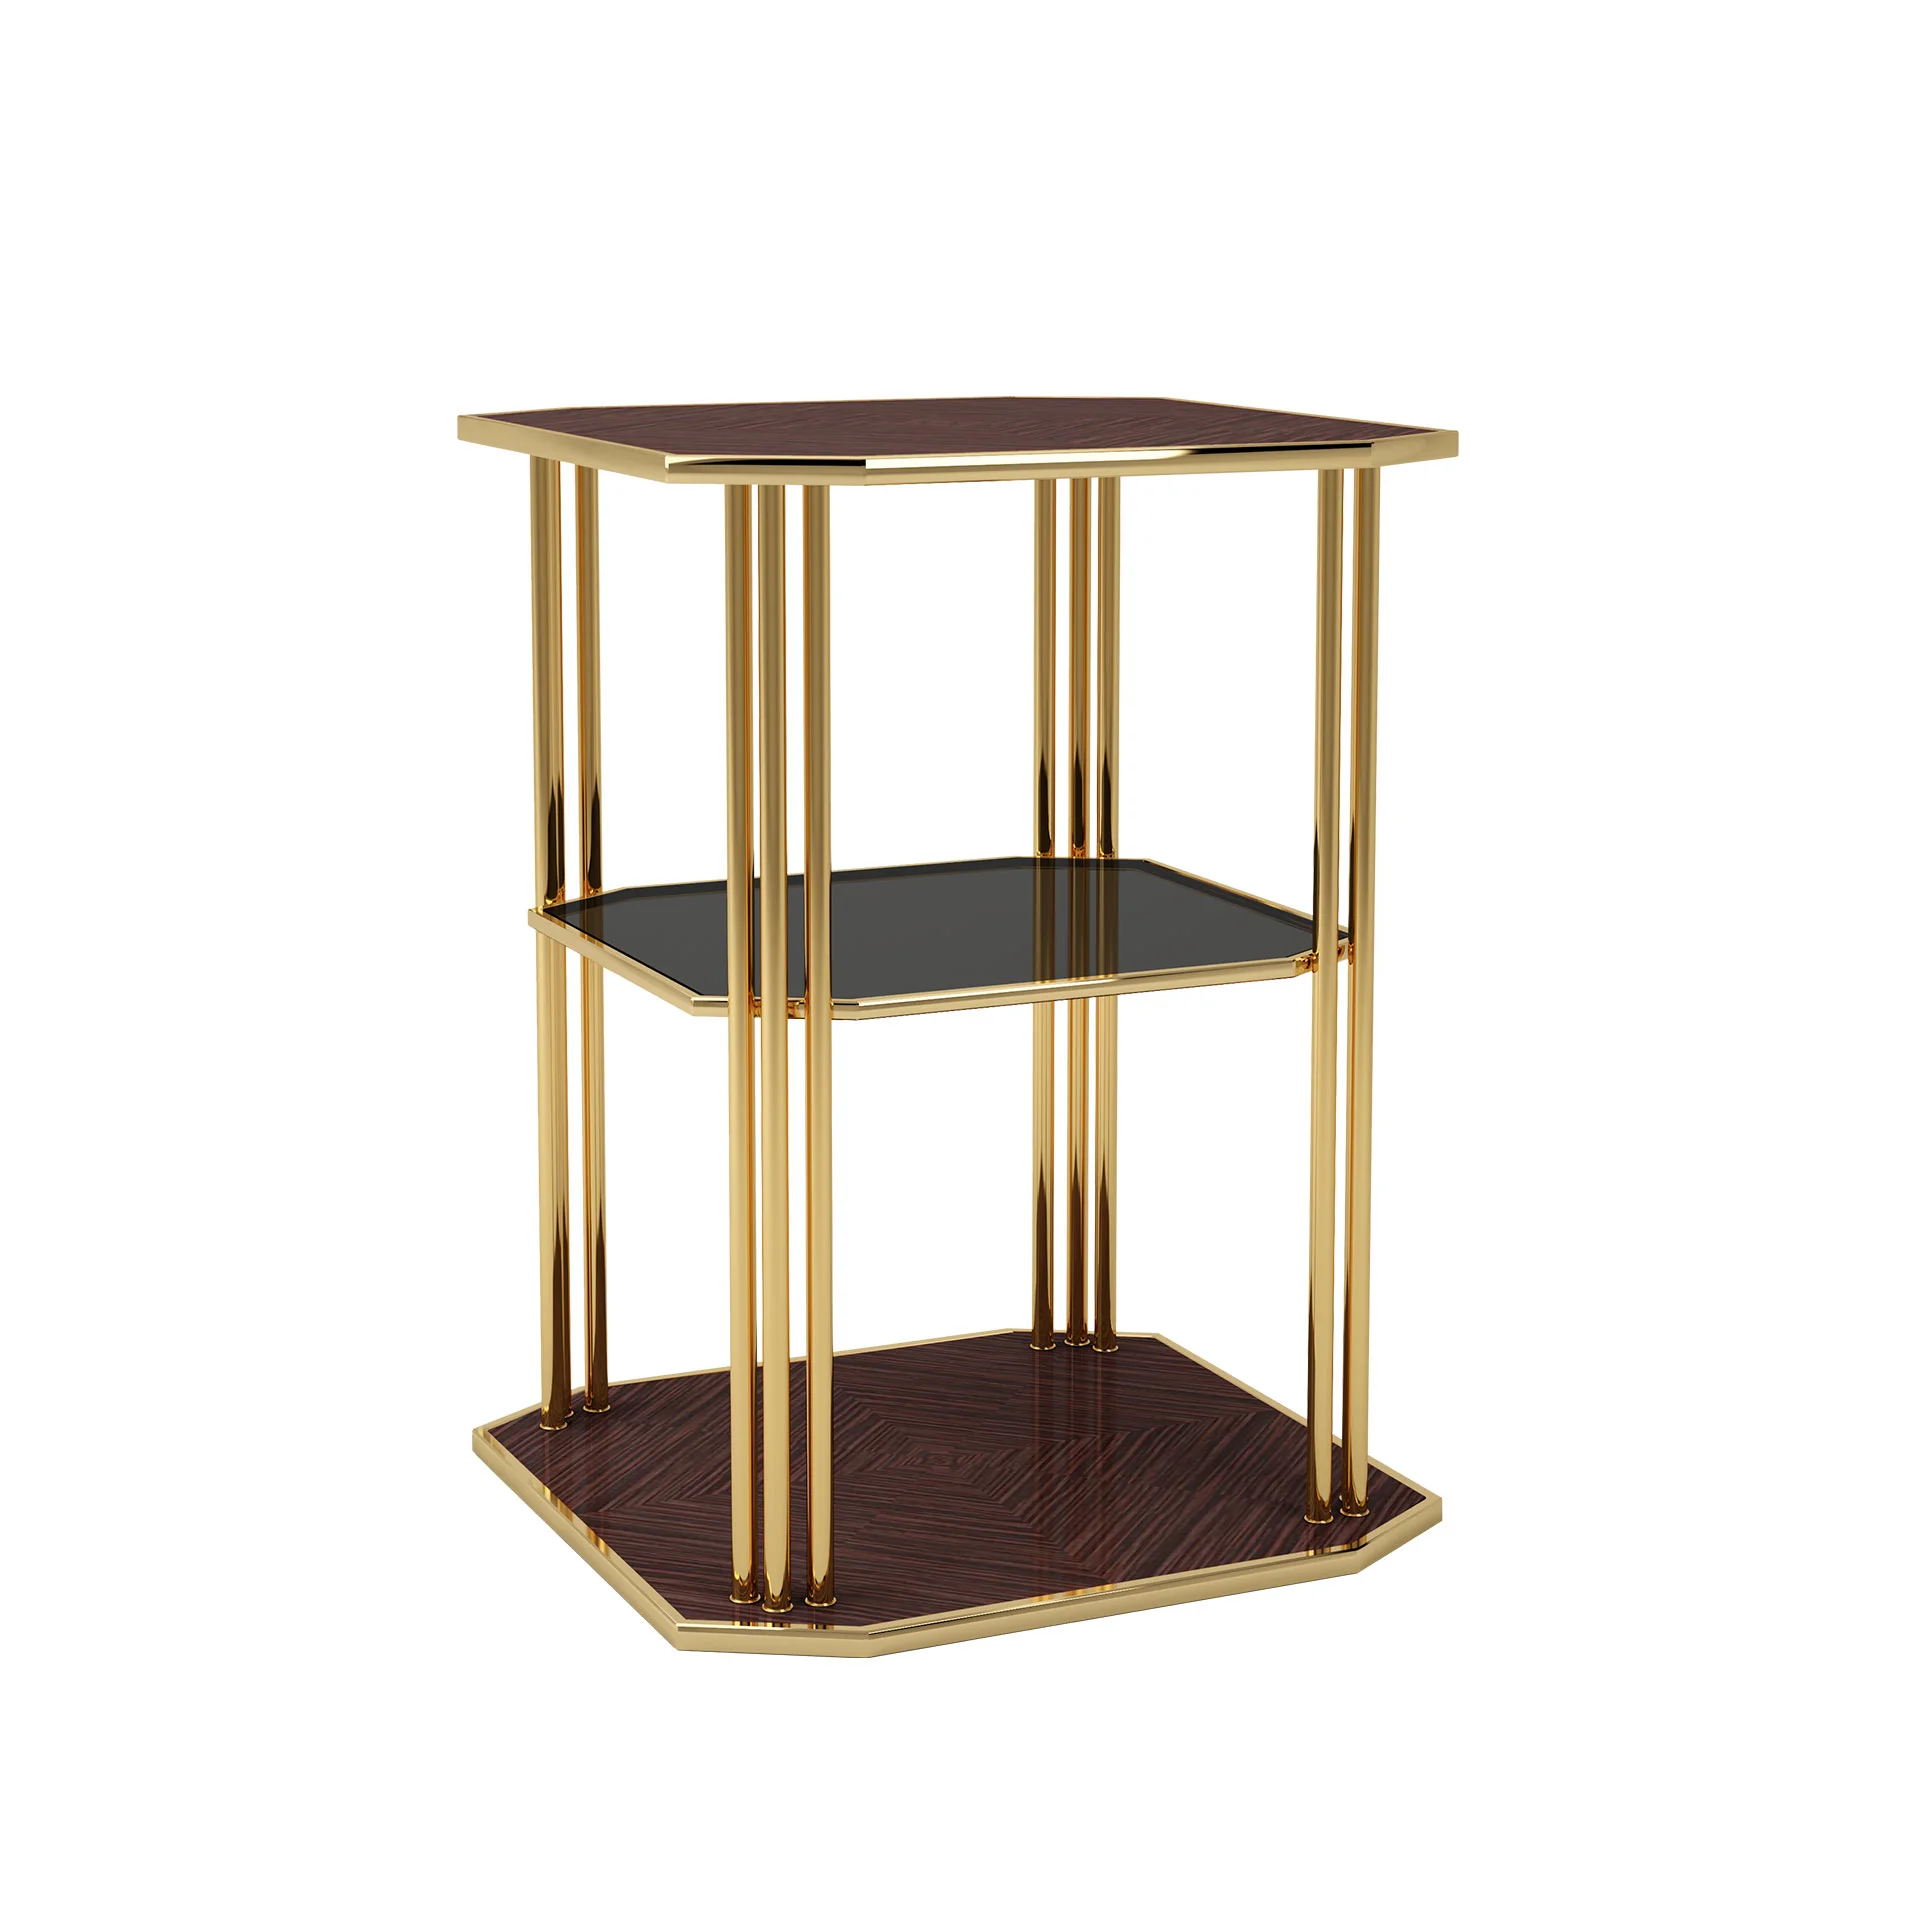 Paramount side table